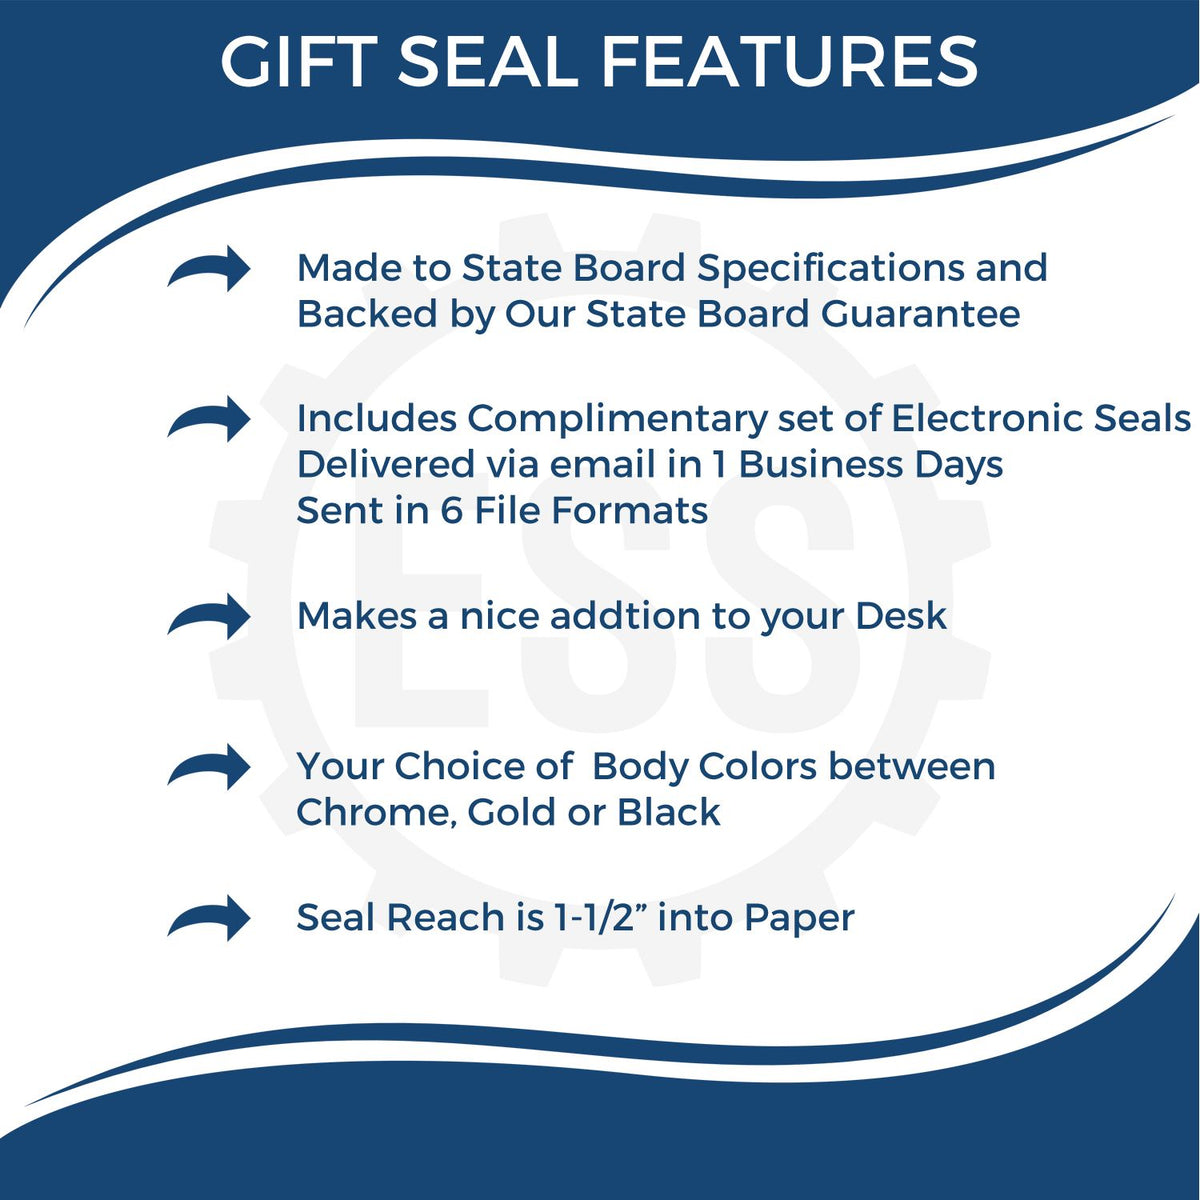 A picture of an infographic highlighting the selling points for the Gift Rhode Island Architect Seal